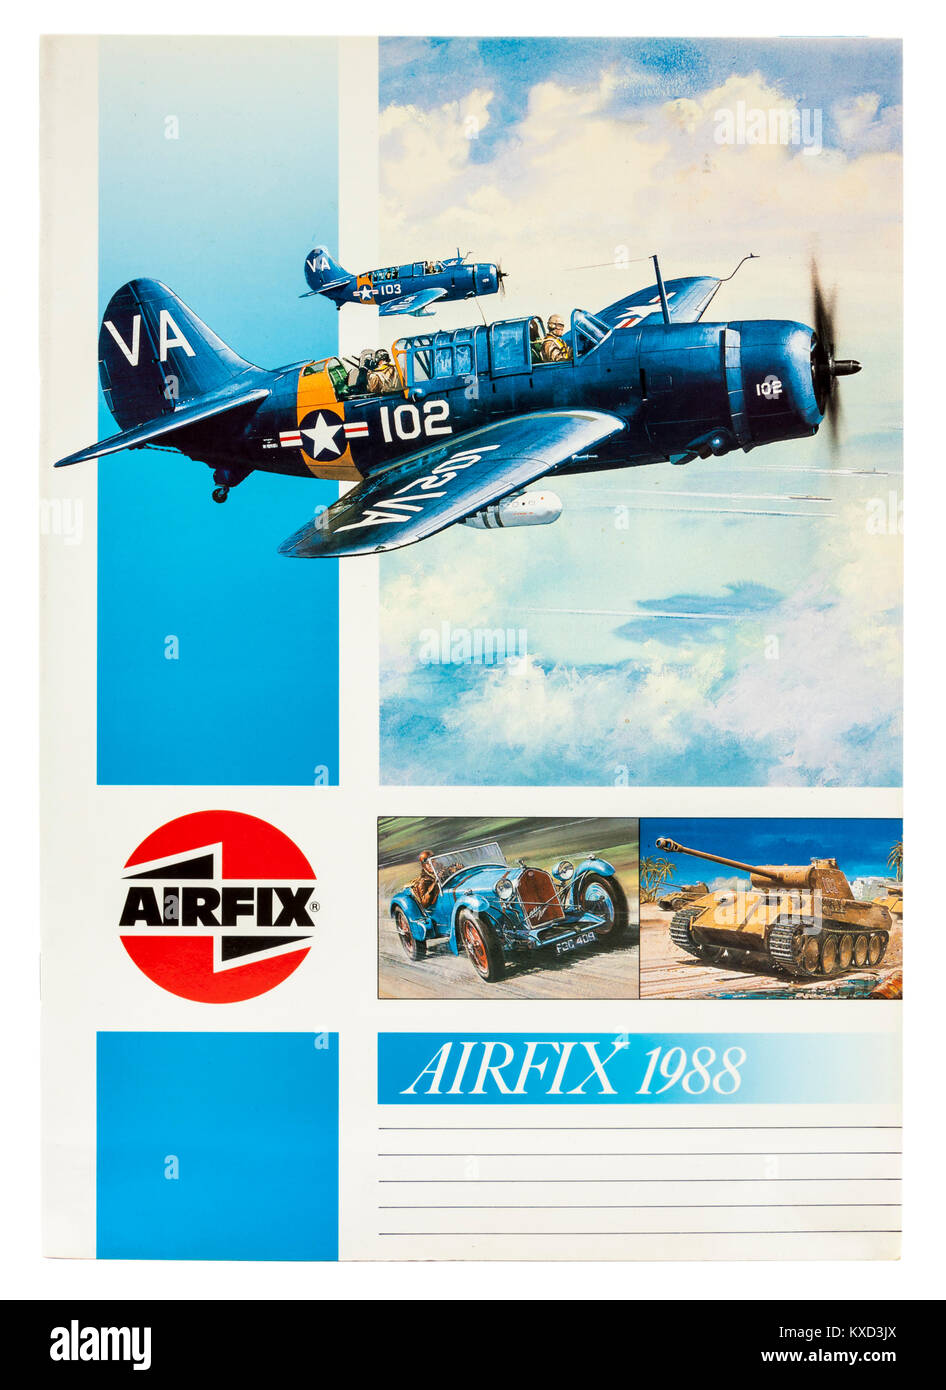 Vintage 1988 Airfix catalogue. Airfix is a UK manufacturer of injection-moulded plastic scale model kits of aircraft and other objects. Stock Photo